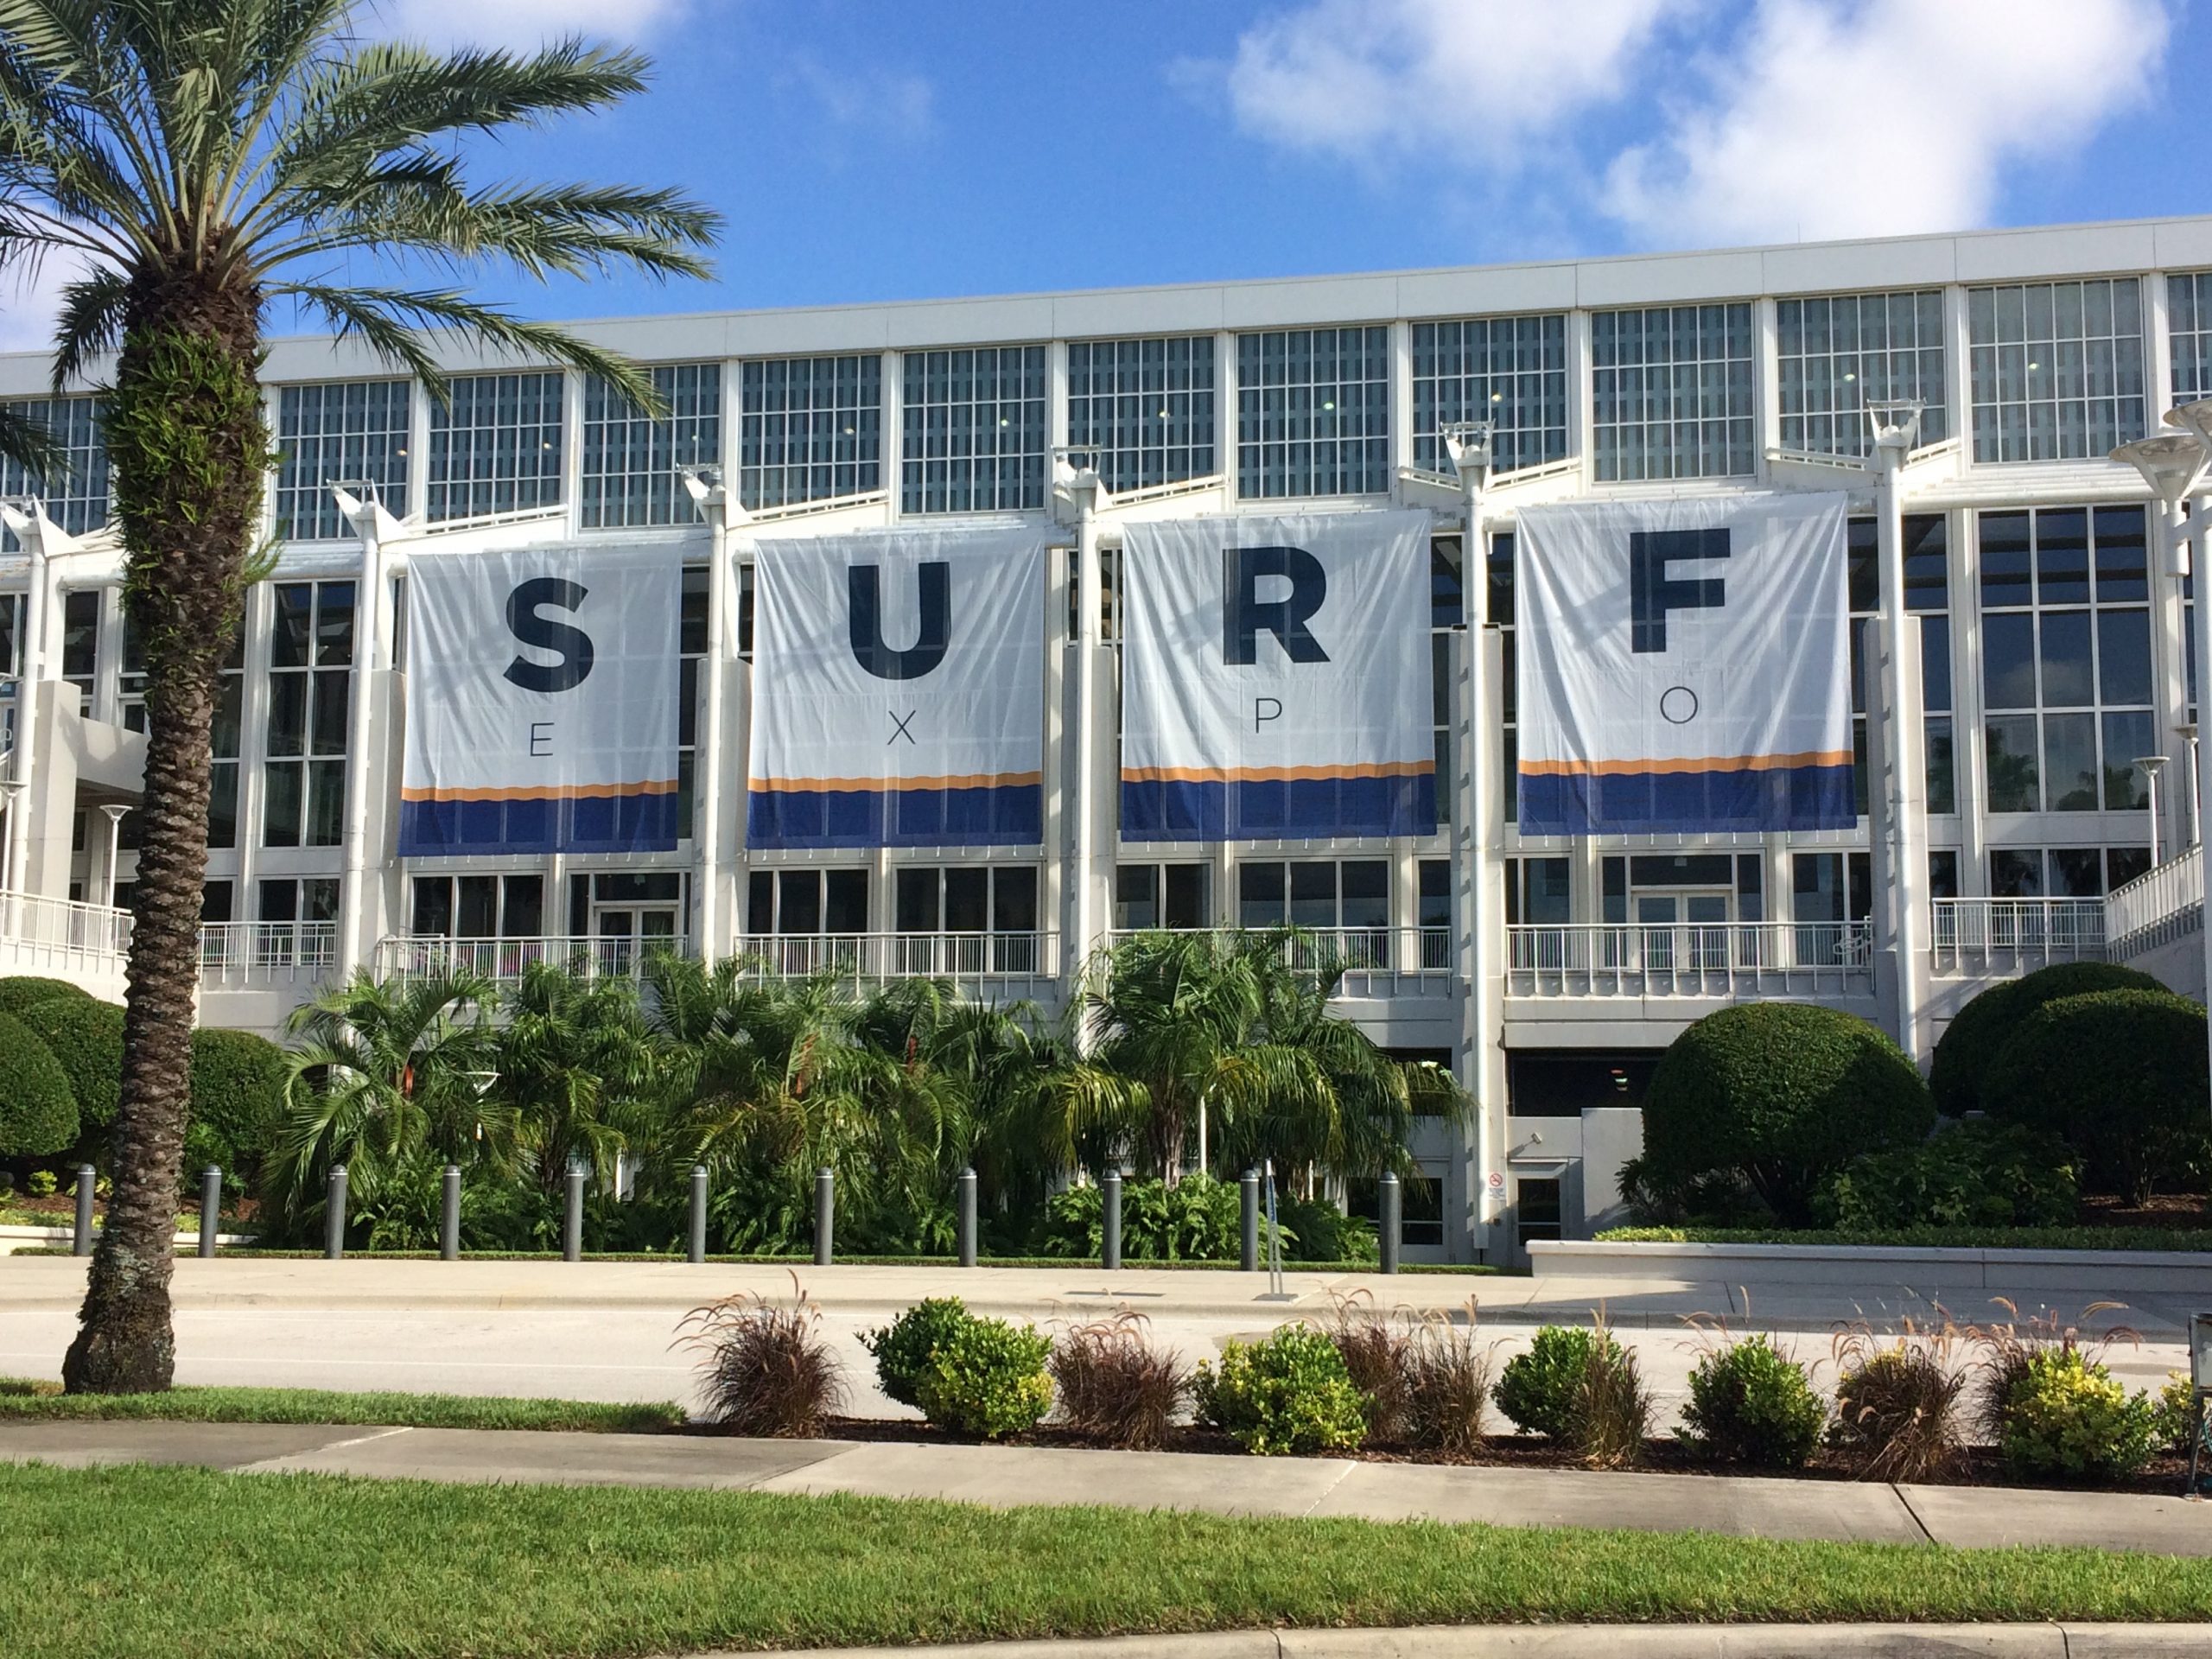 1 Surf Expo took place inside its regular venue Orange County Convention Center In Orland Florida